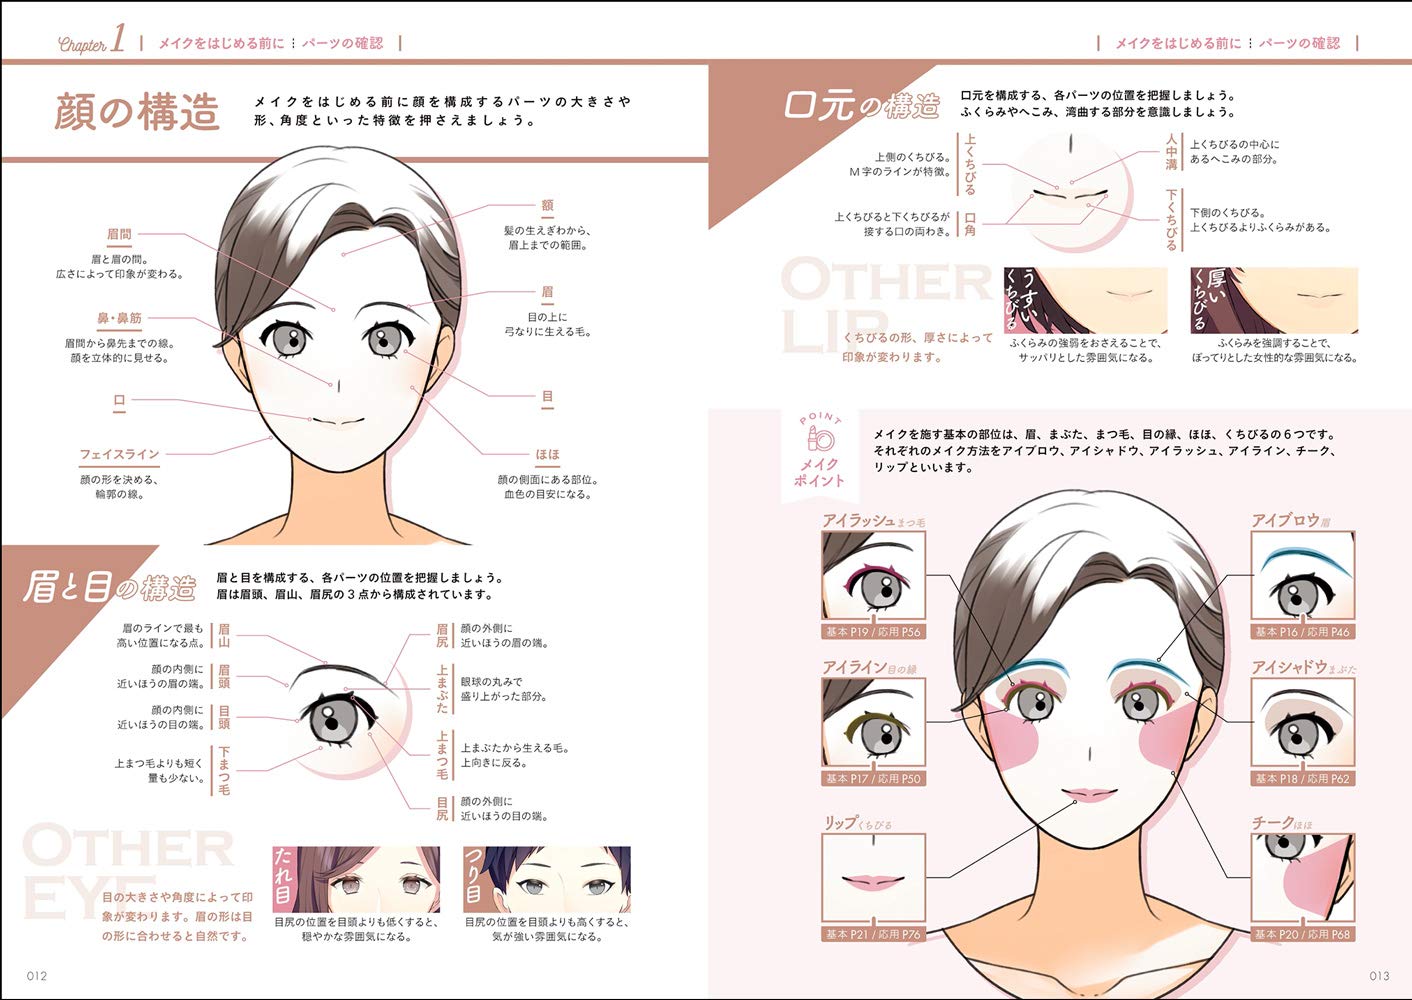 MAKE UP BOOK FOR GIRL DRAWING